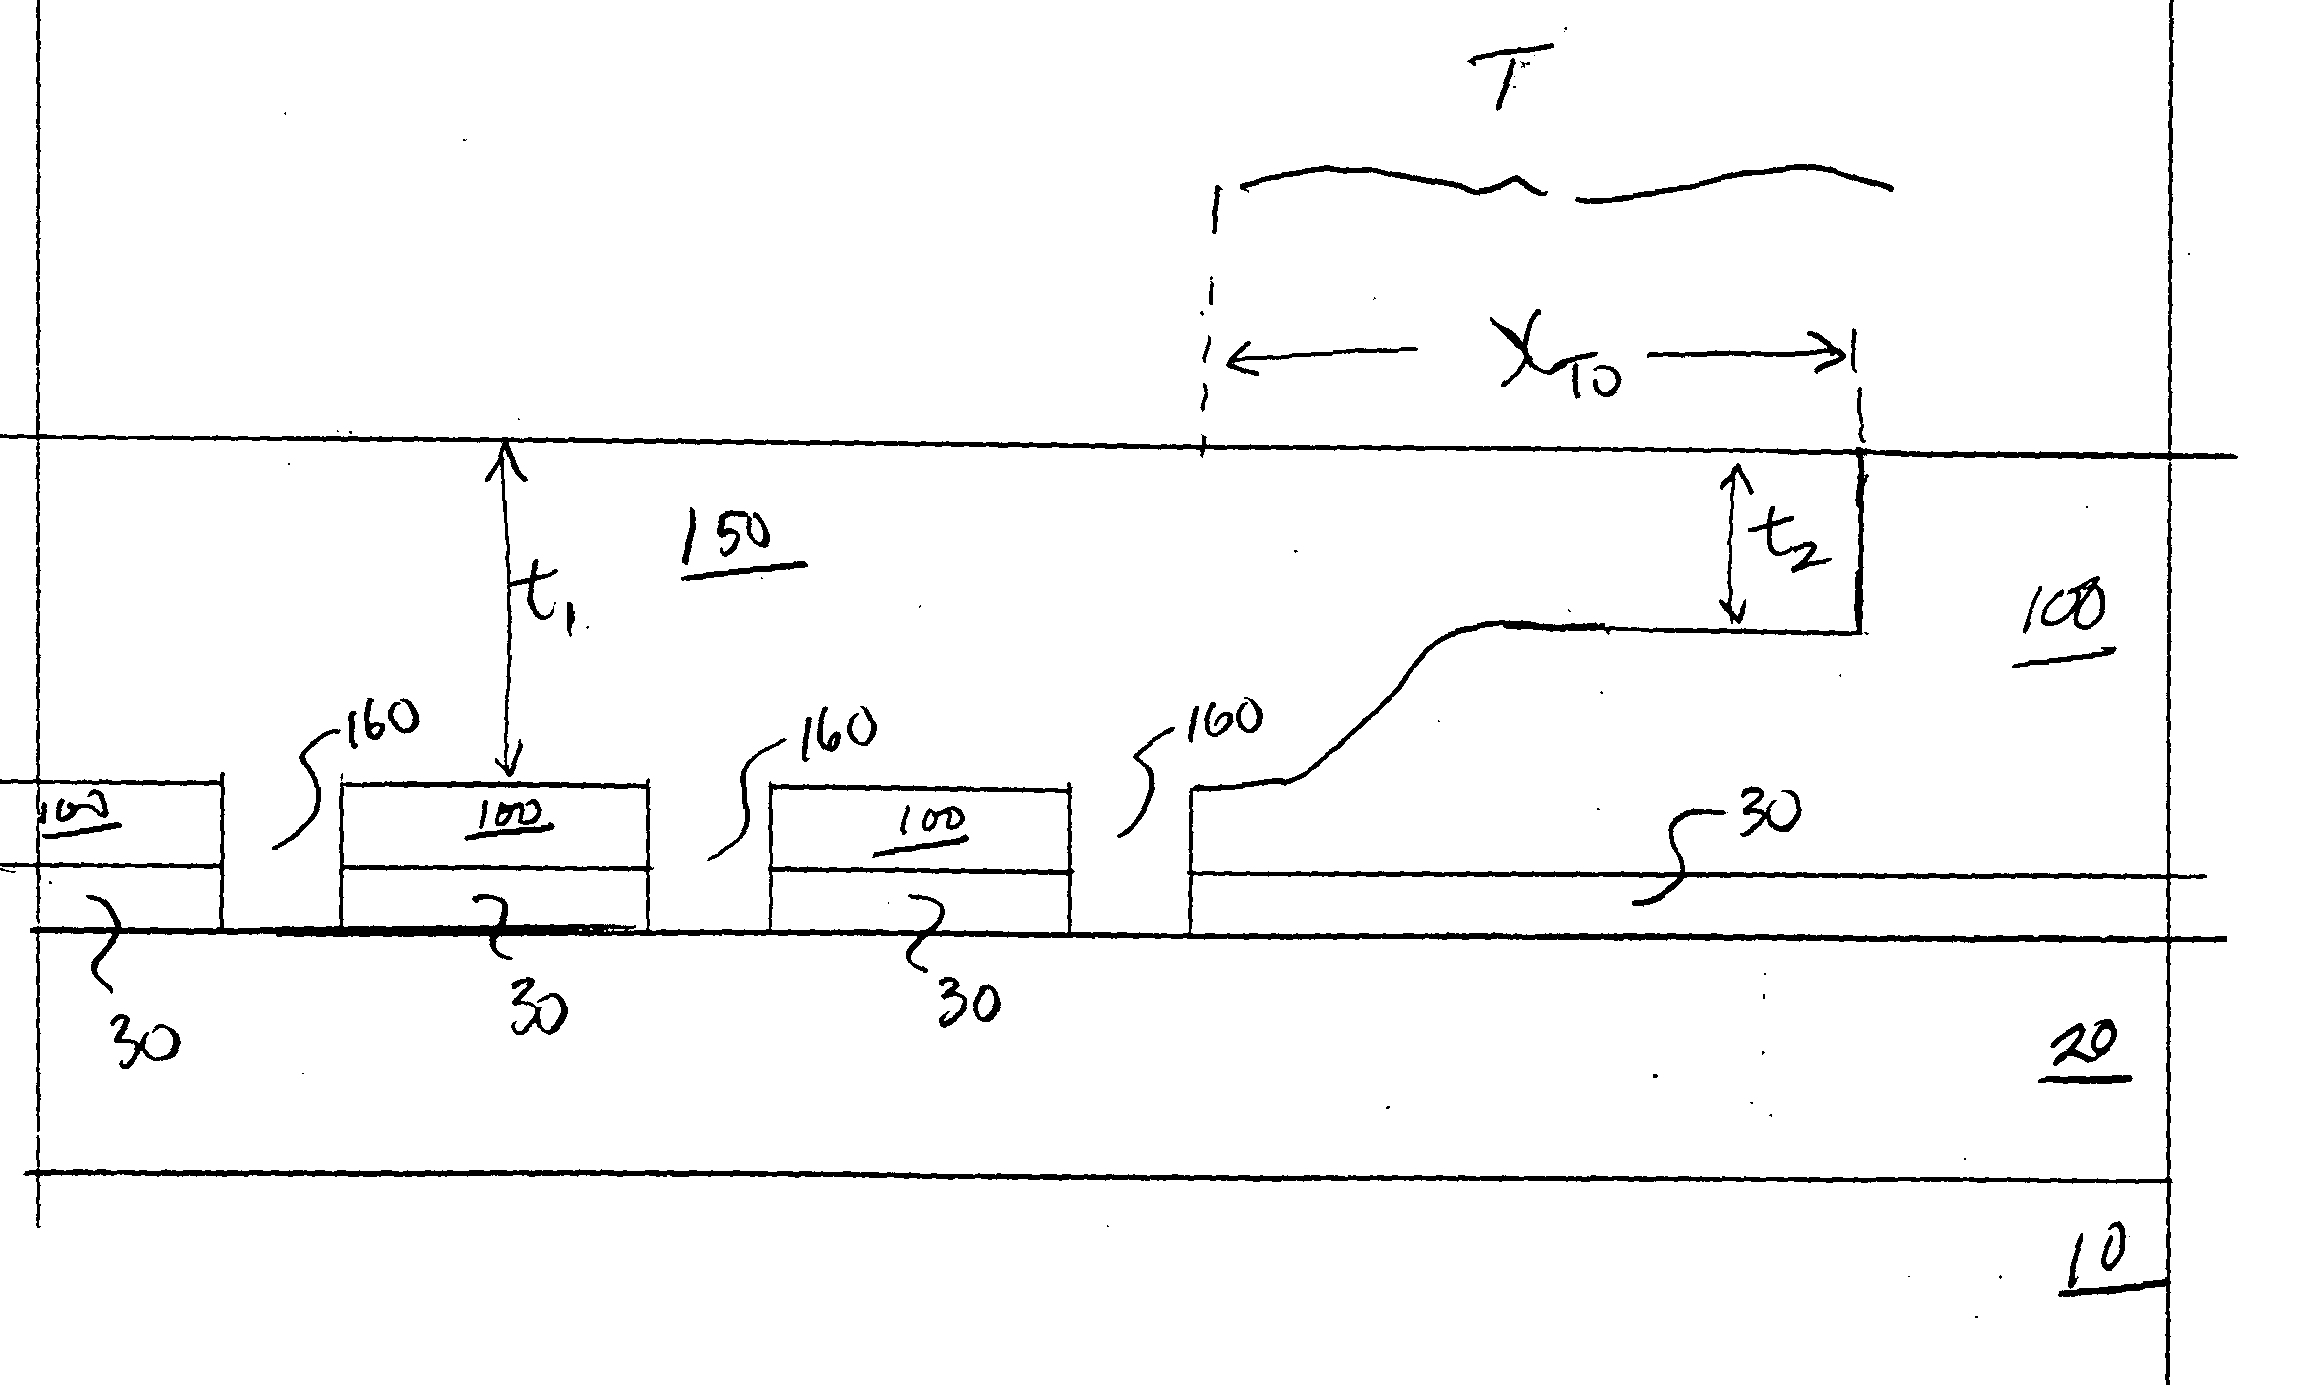 Dual depth trench termination method for improving Cu-based interconnect integrity